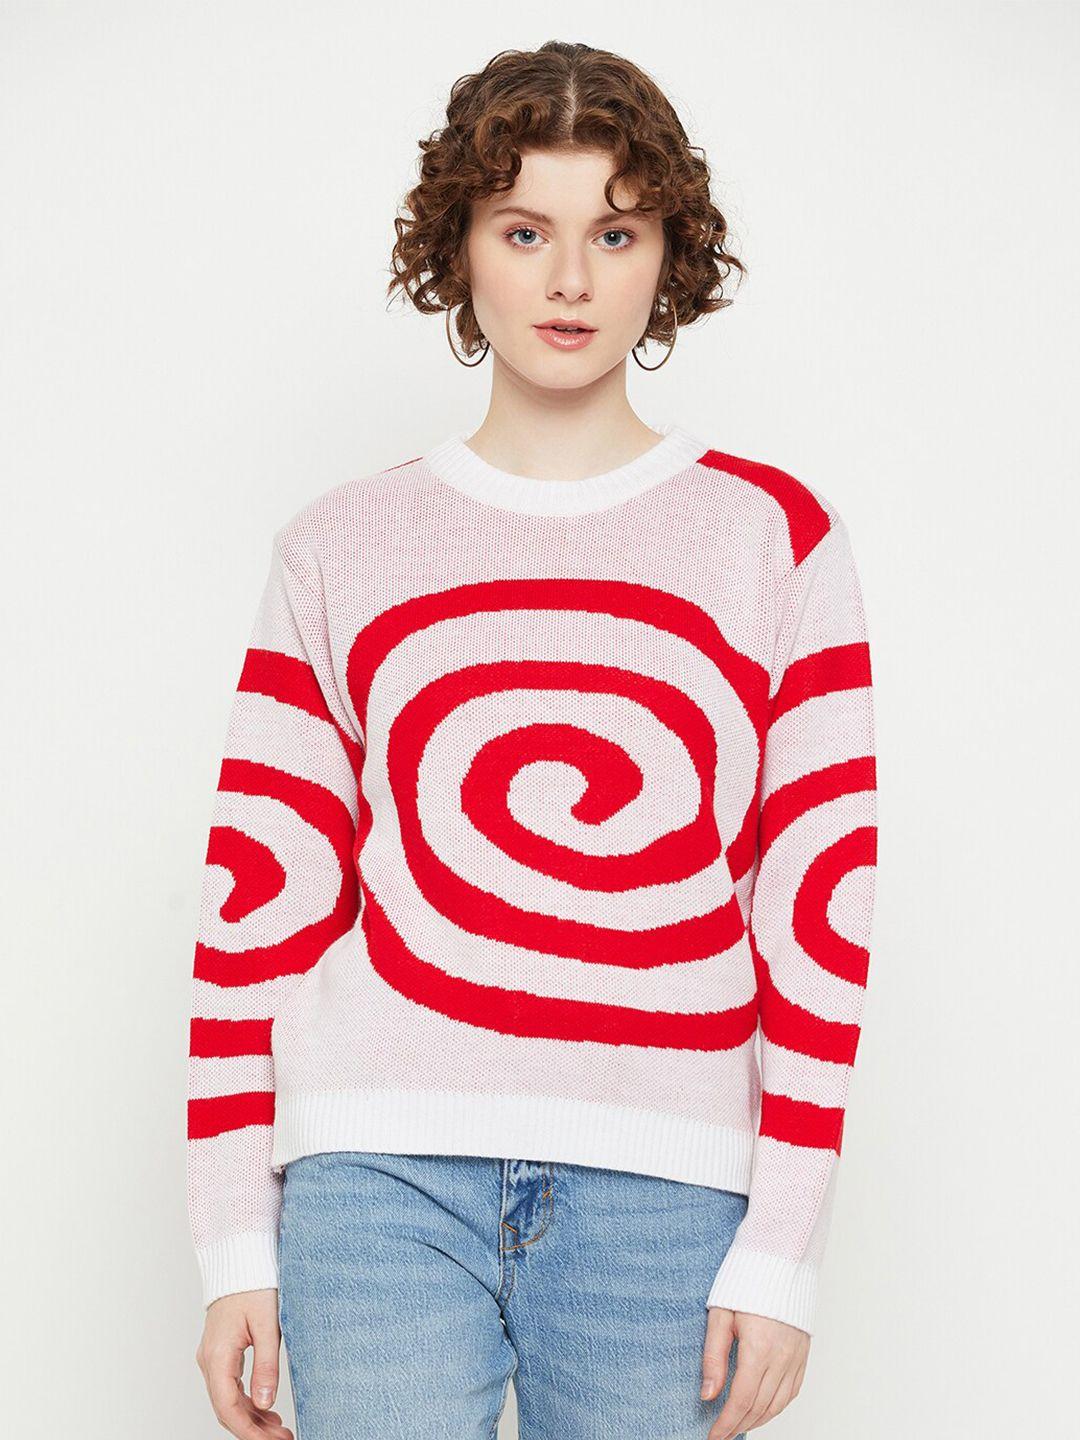 kasma-abstract-printed-woollen-pullover-sweater